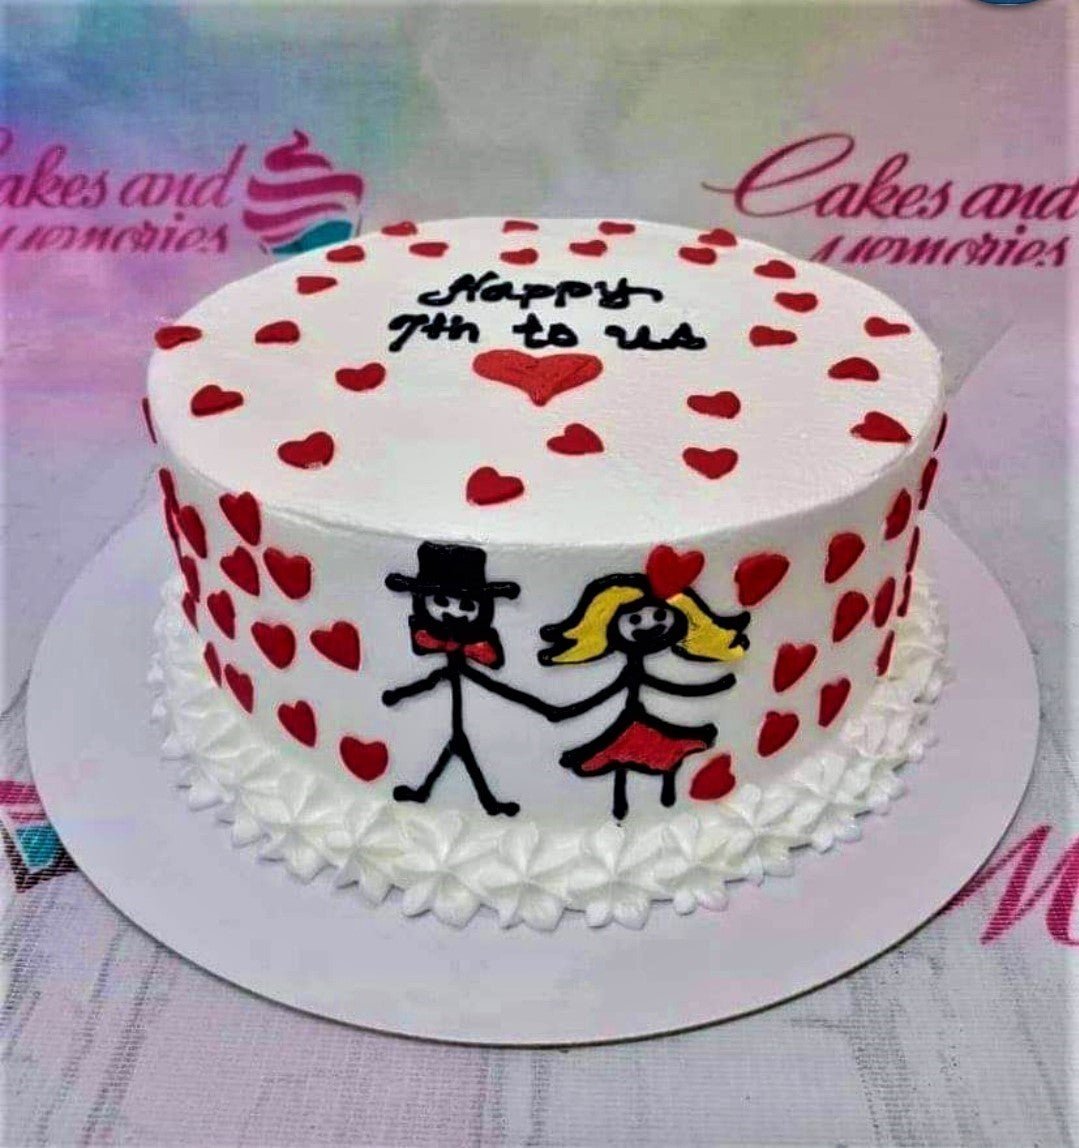 When you never got a wedding cake… You get the perfect 7th Anniversary... |  TikTok